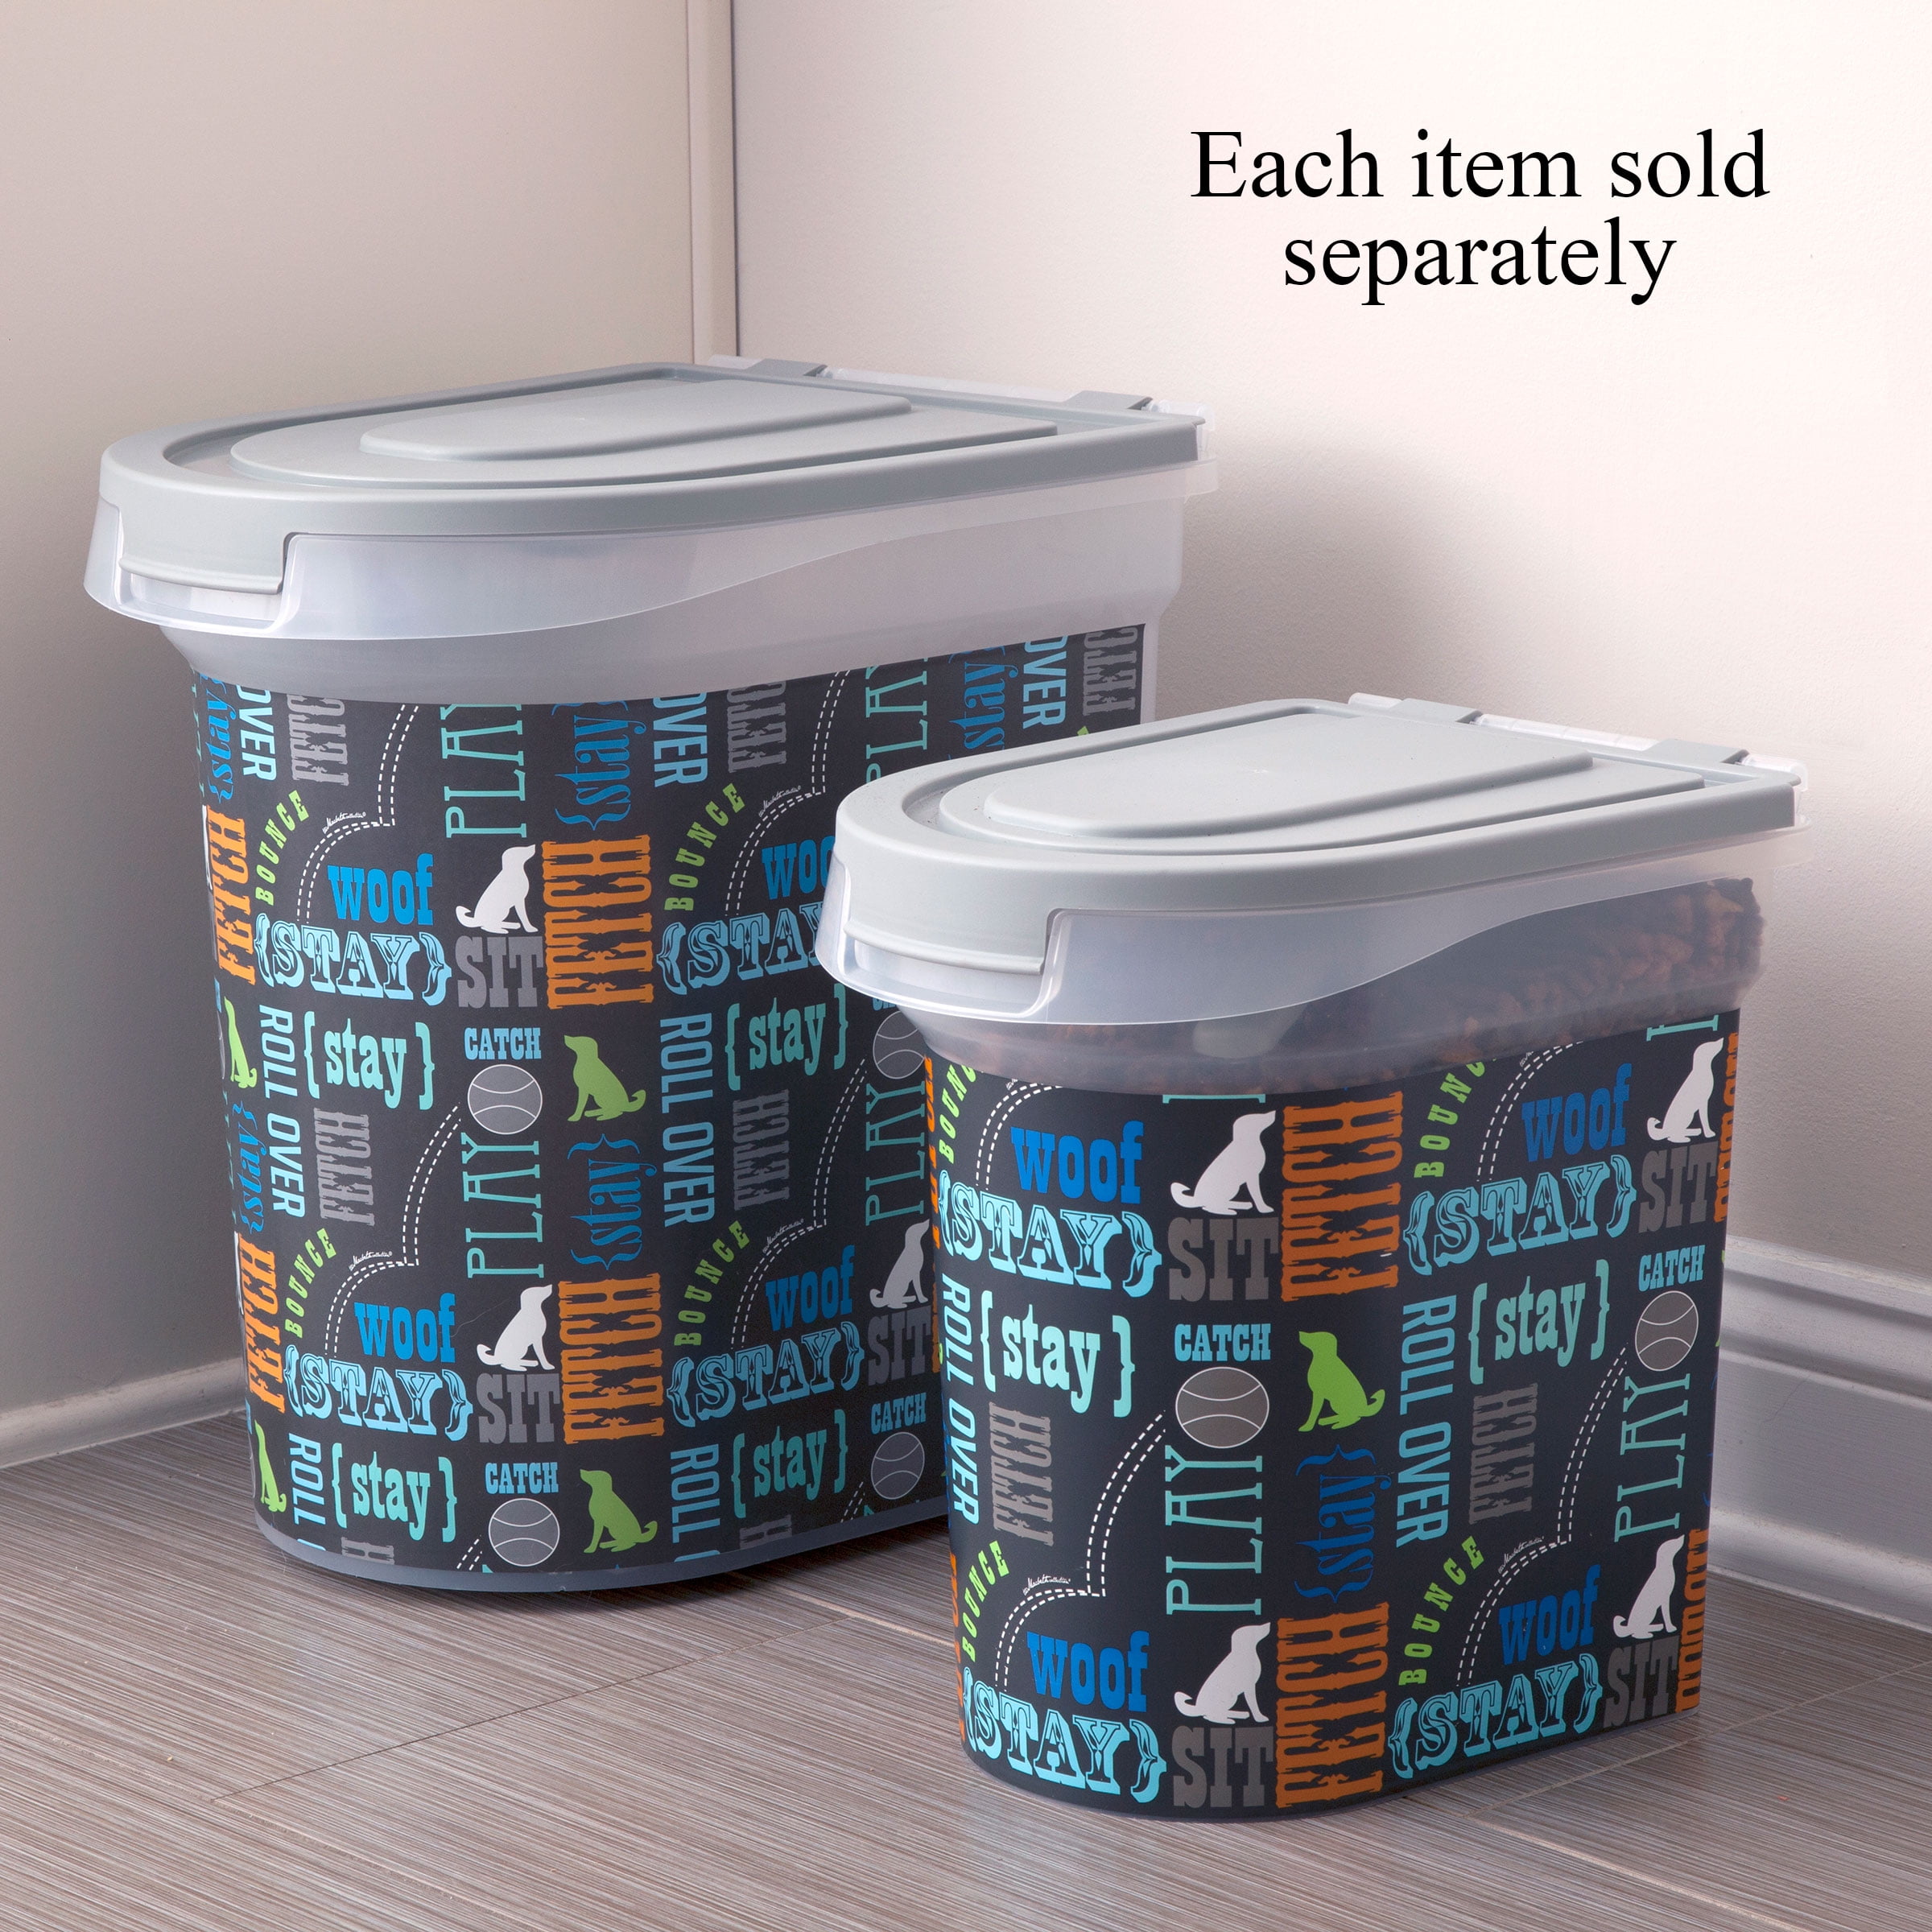 26 lb dog food container